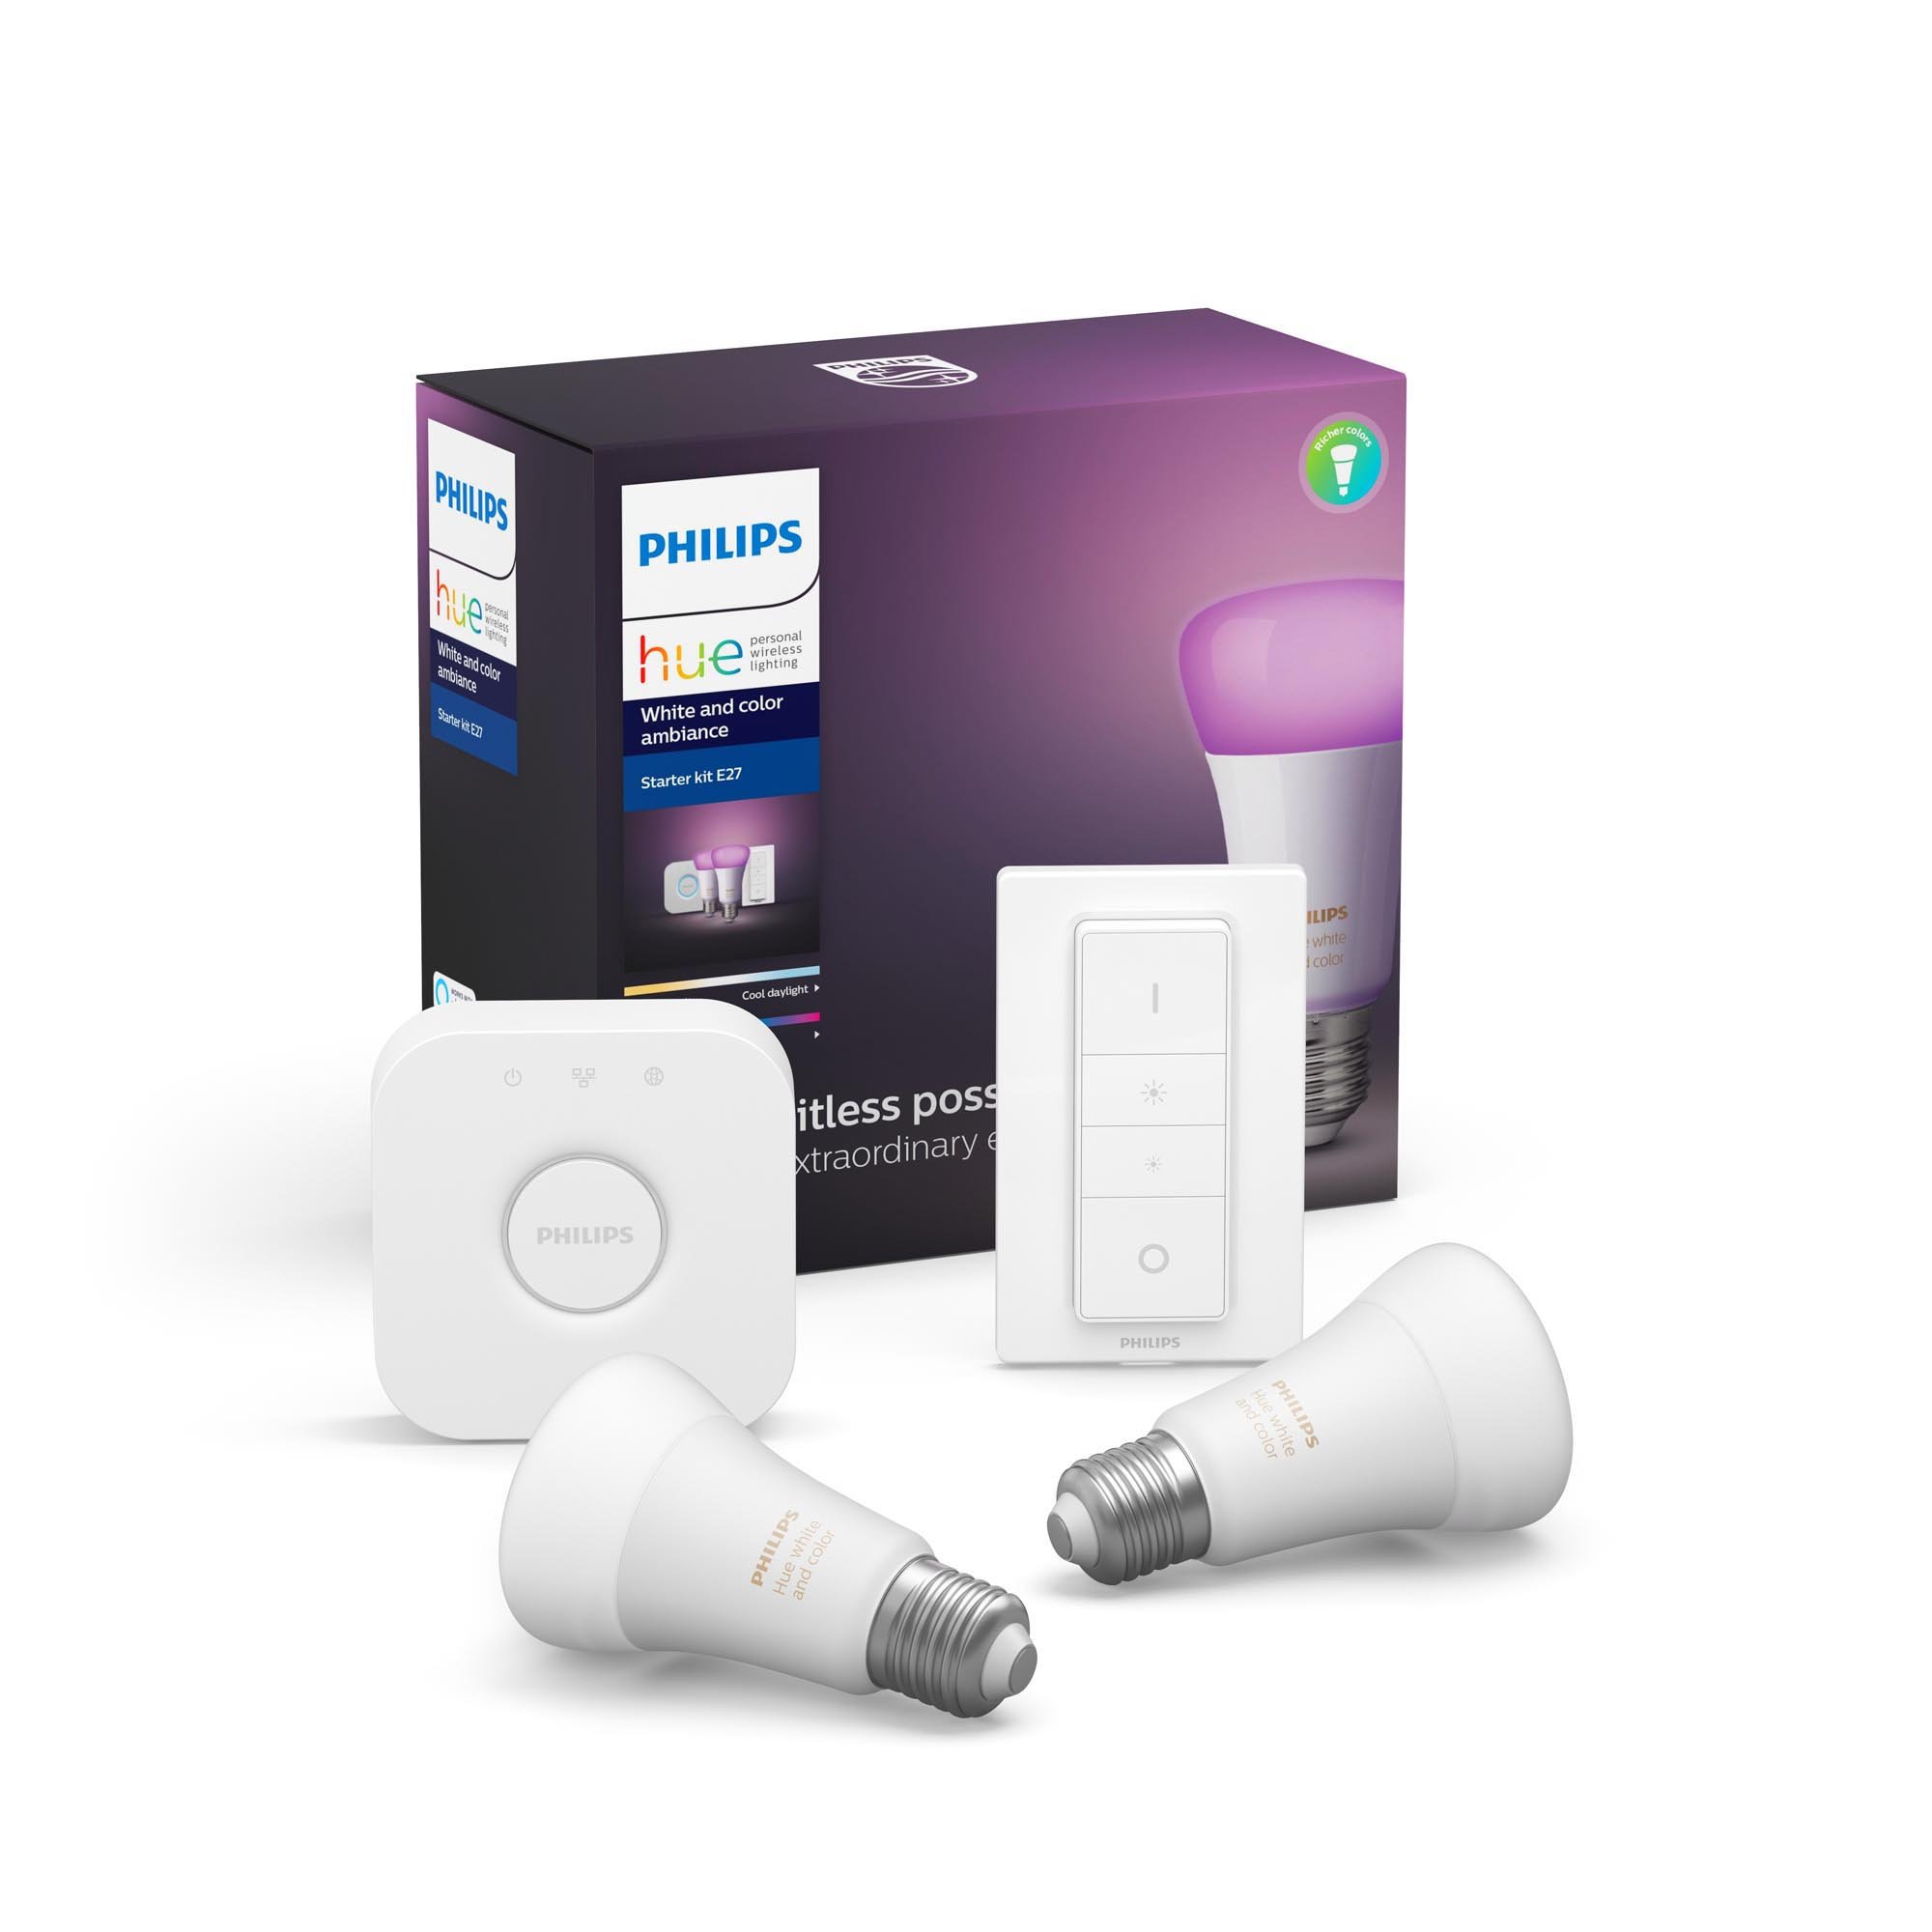 Philips Hue - 2xE27 + Bridge & Dimmer - Starter Kit - White and Color Ambiance